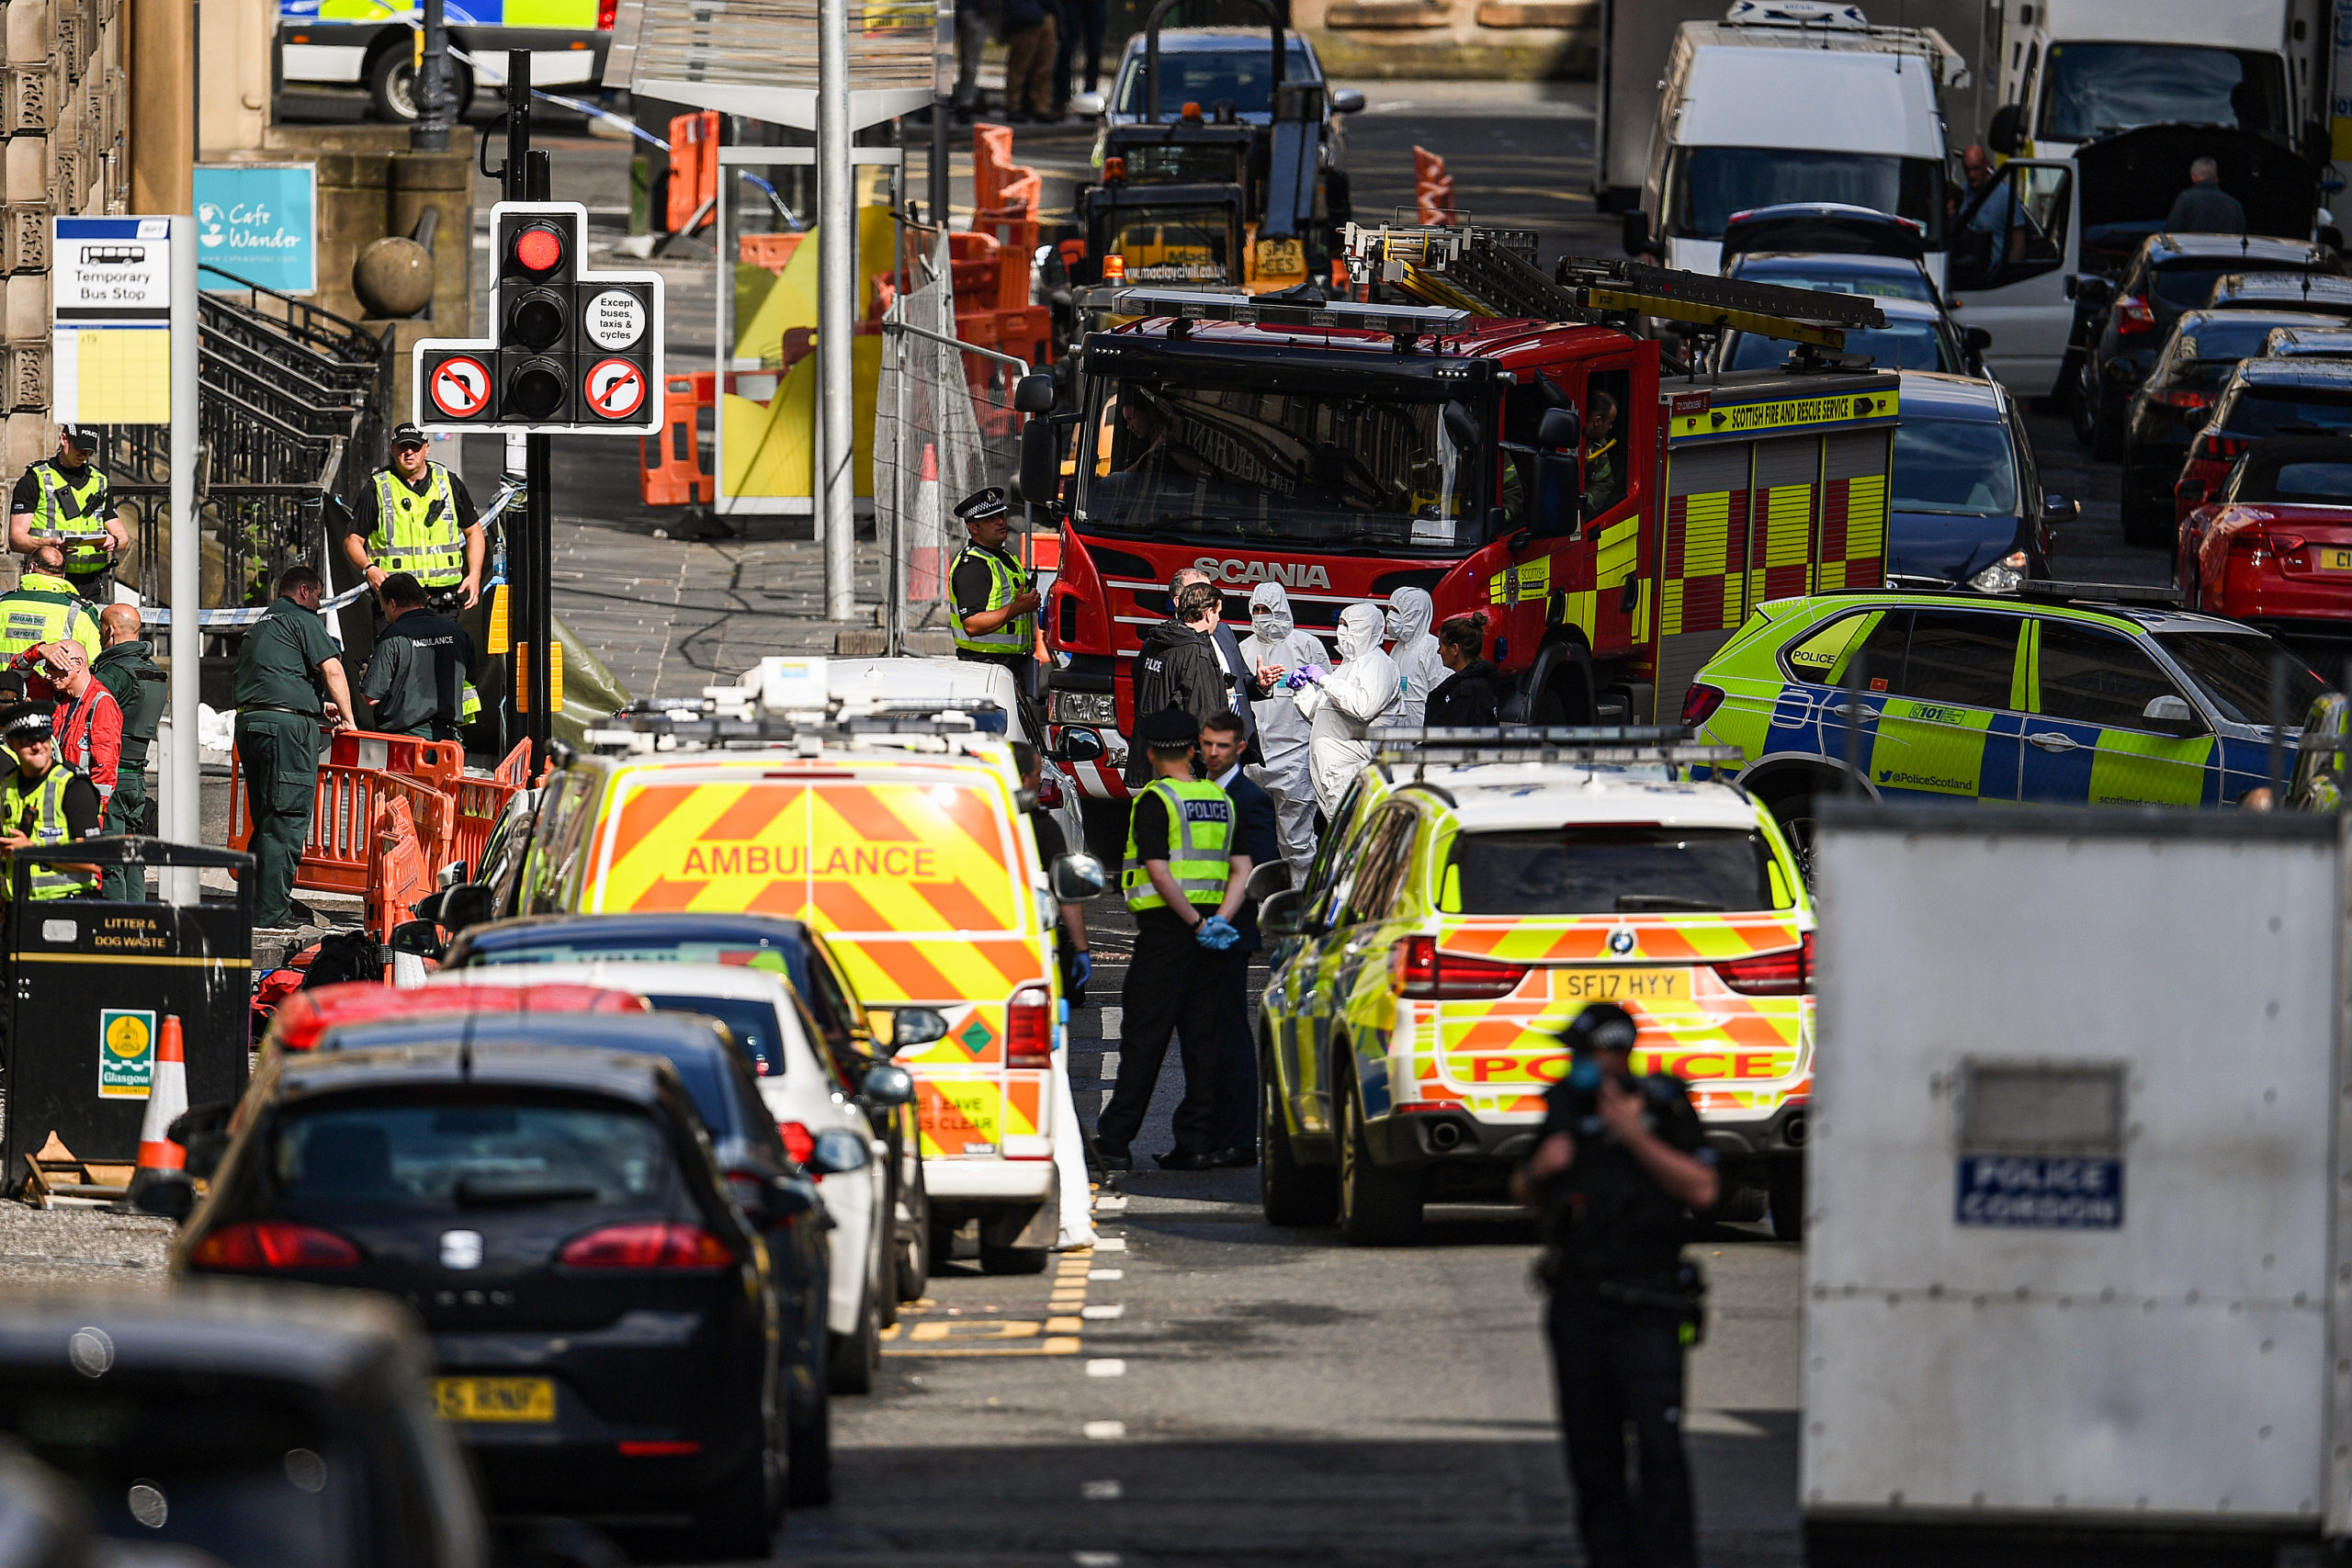 Police officers attend the scene after Glasgow attack. (Photo by Jeff J Mitchell/Getty Images)